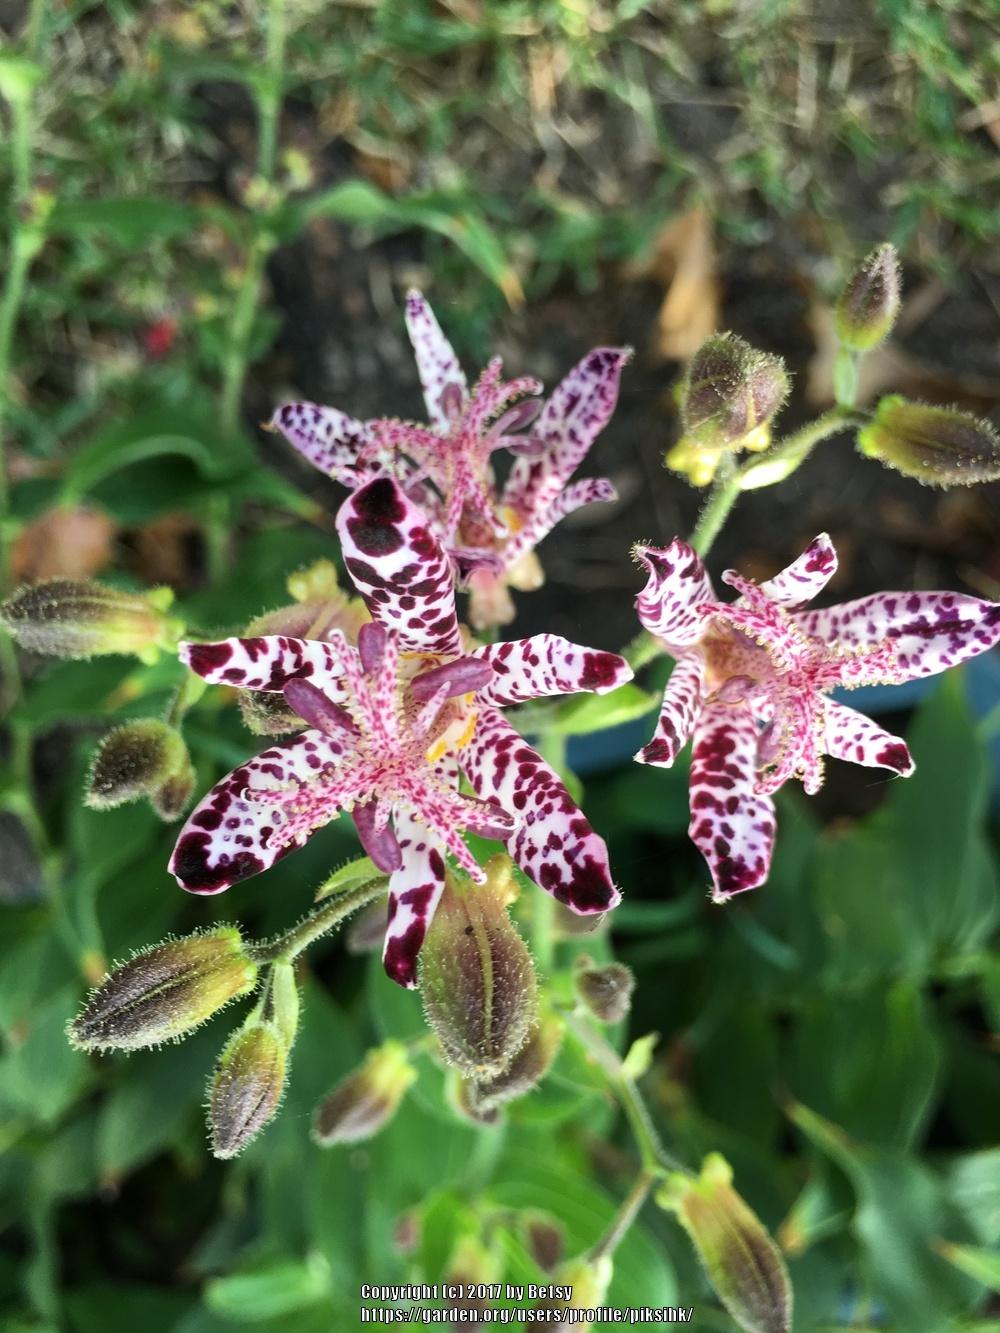 Photo of Japanese Toad Lily (Tricyrtis hirta) uploaded by piksihk